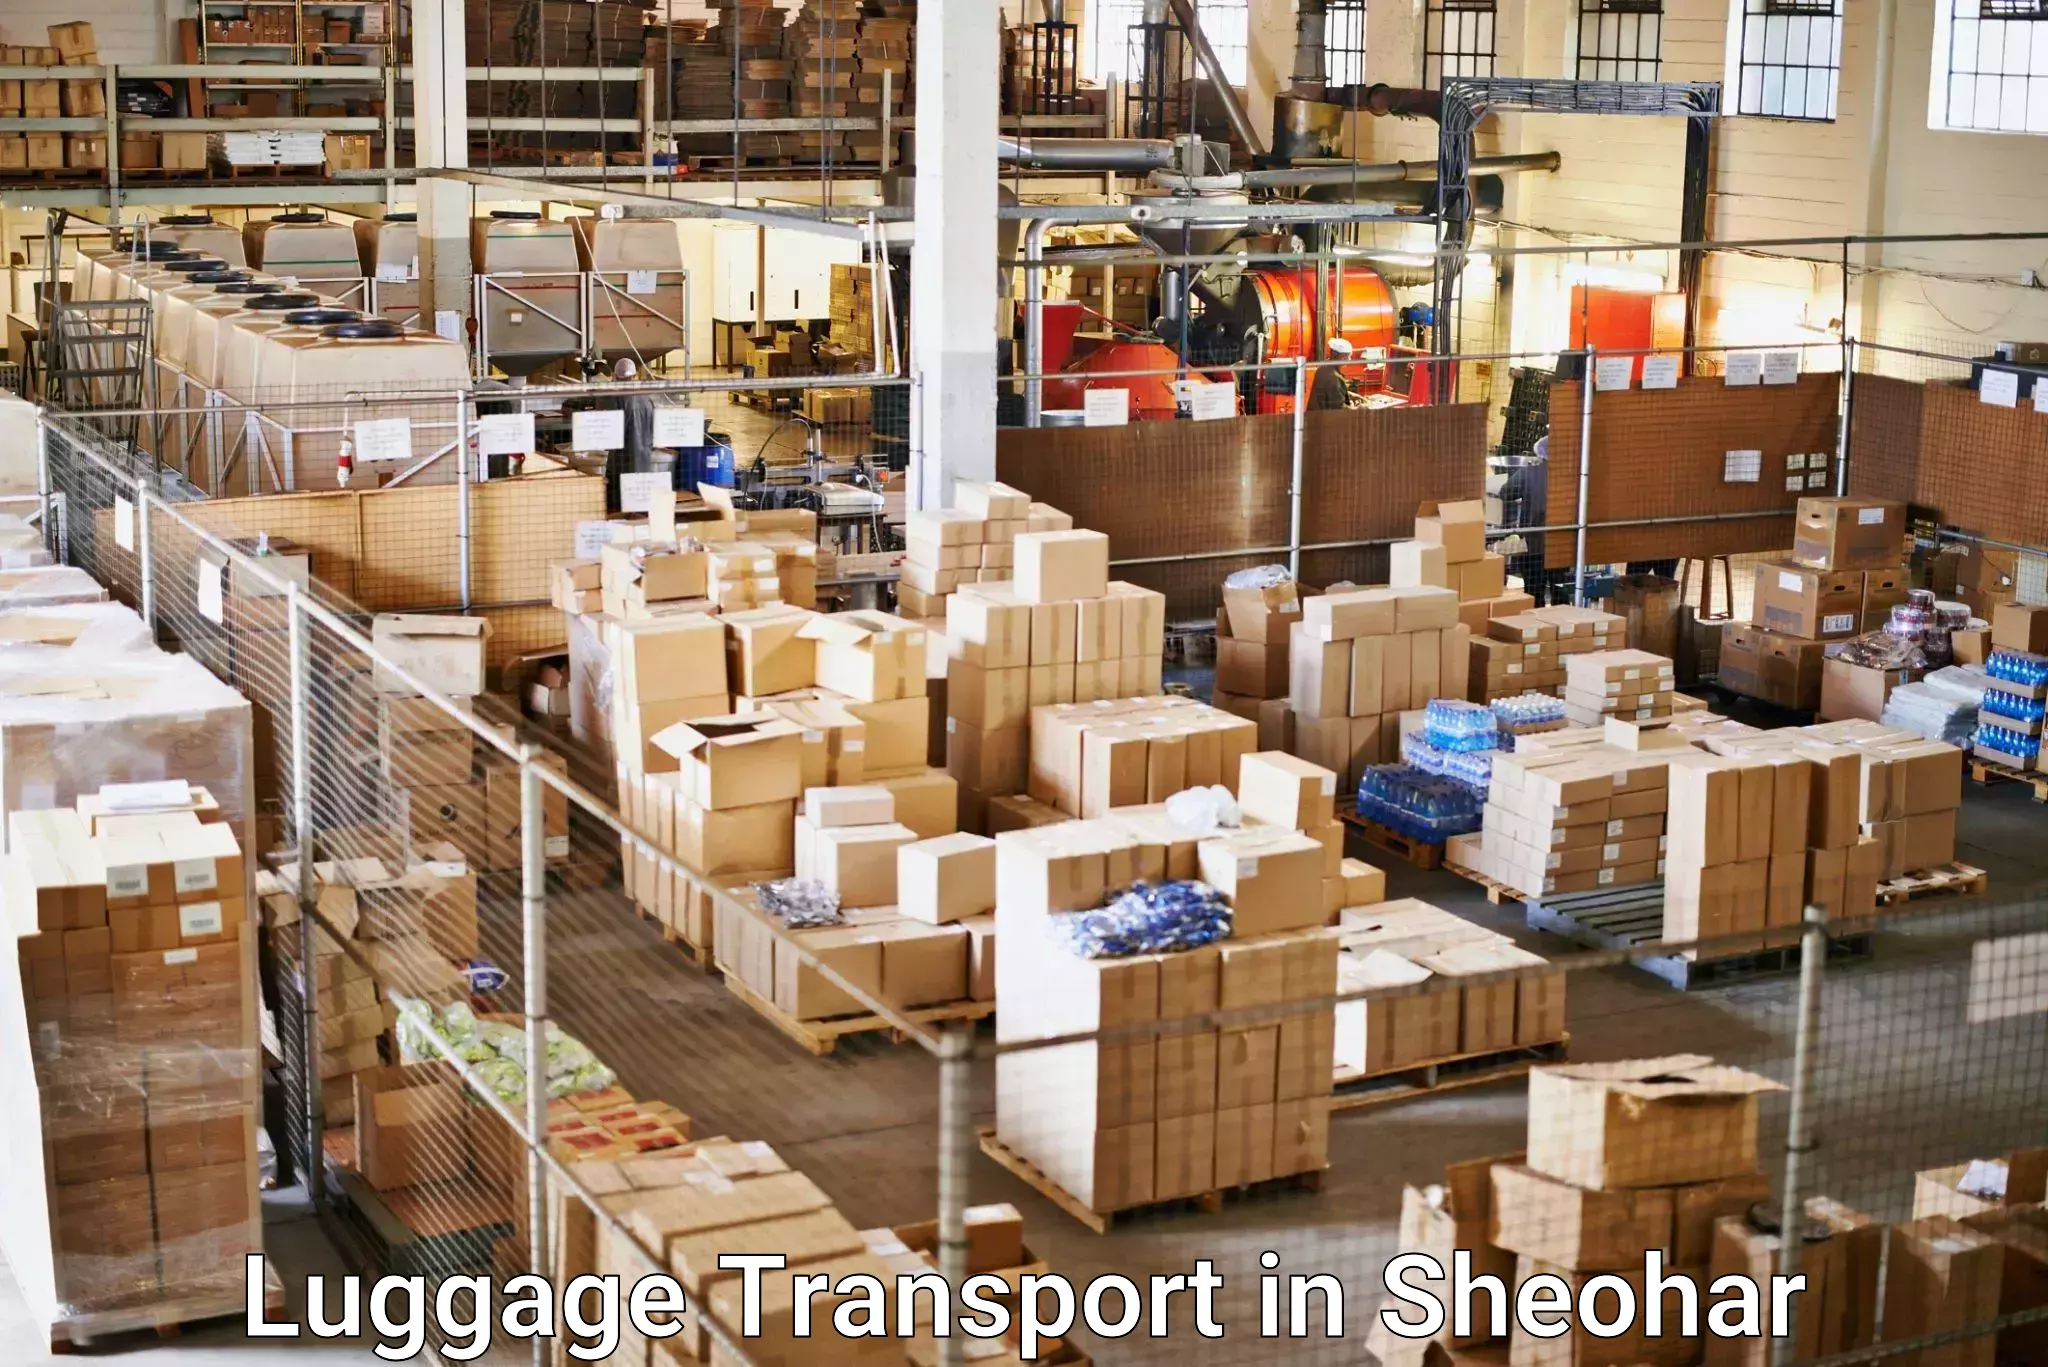 Luggage forwarding service in Sheohar